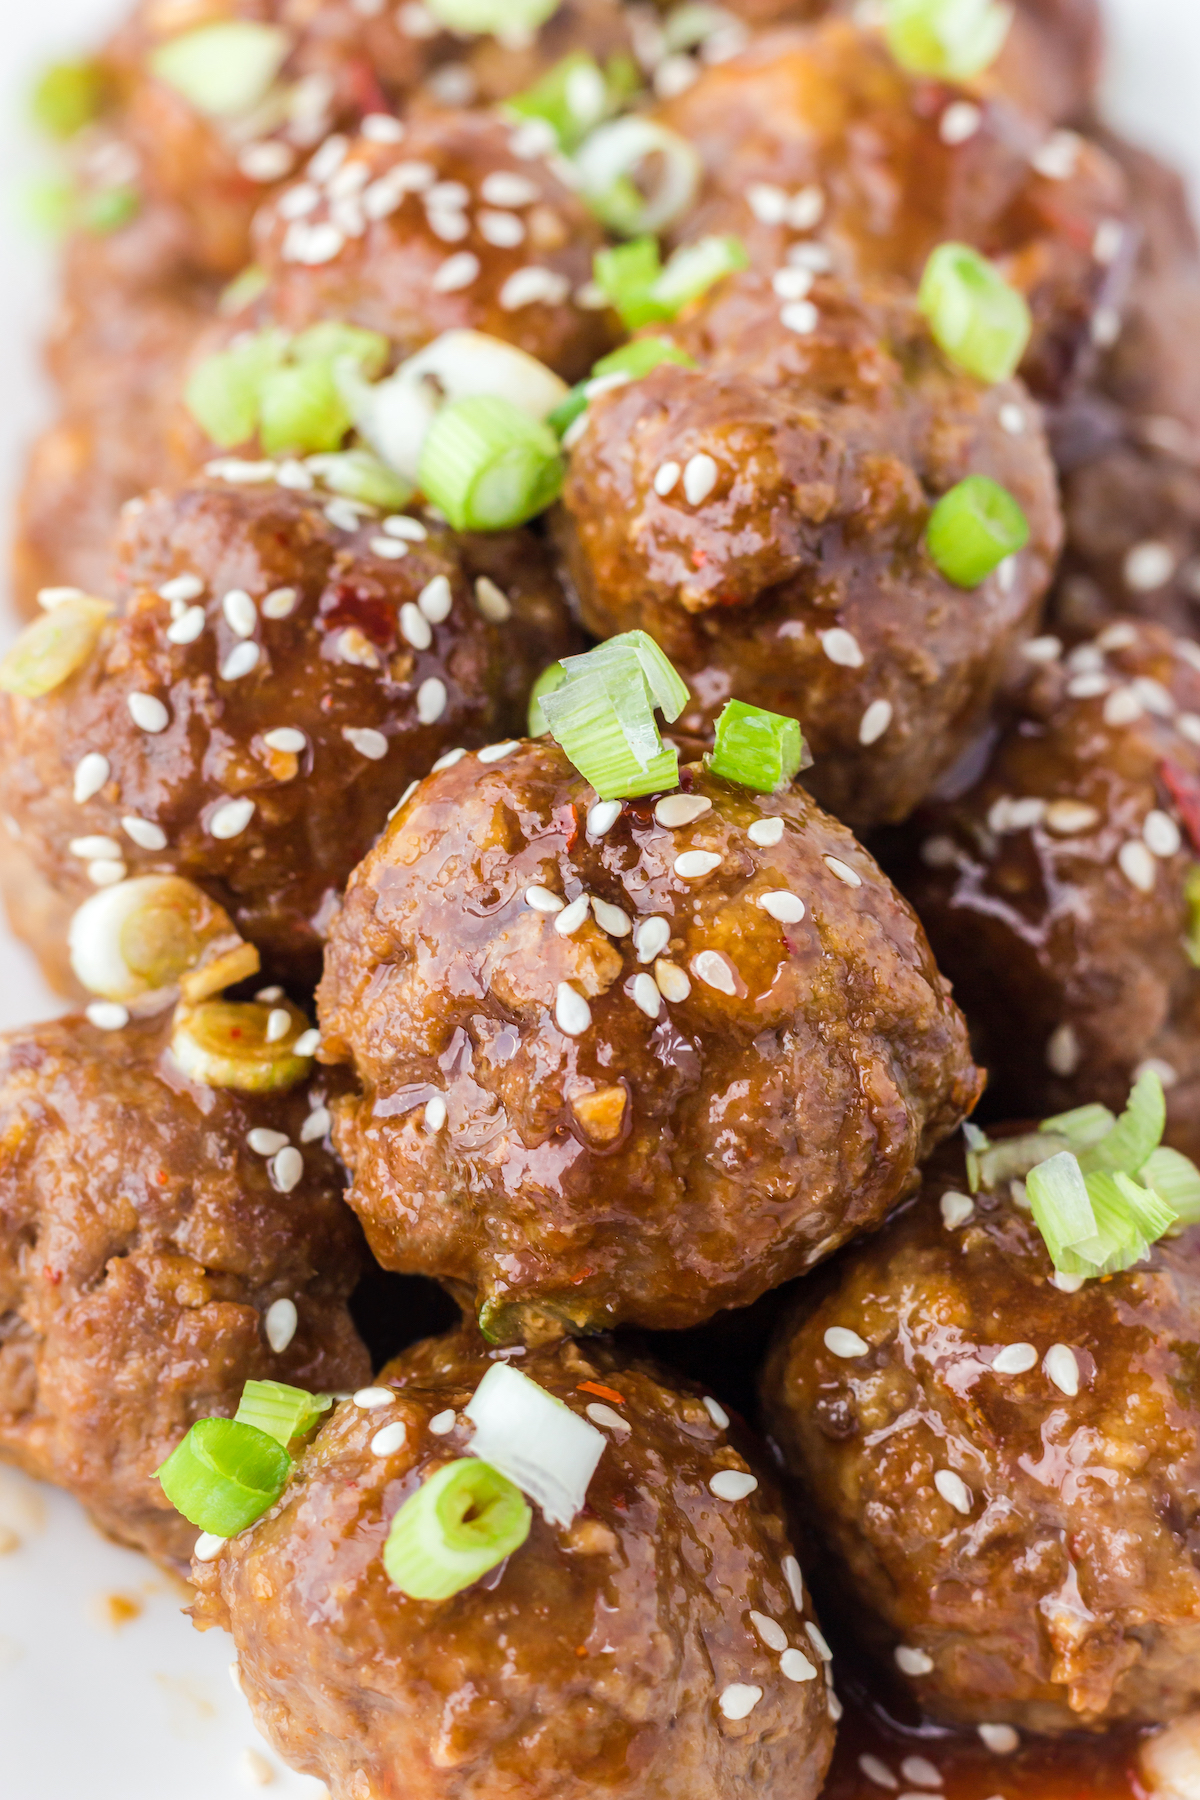 Dozens of asian meatballs covered in brown sauce, sesame seeds, and sliced green onions.